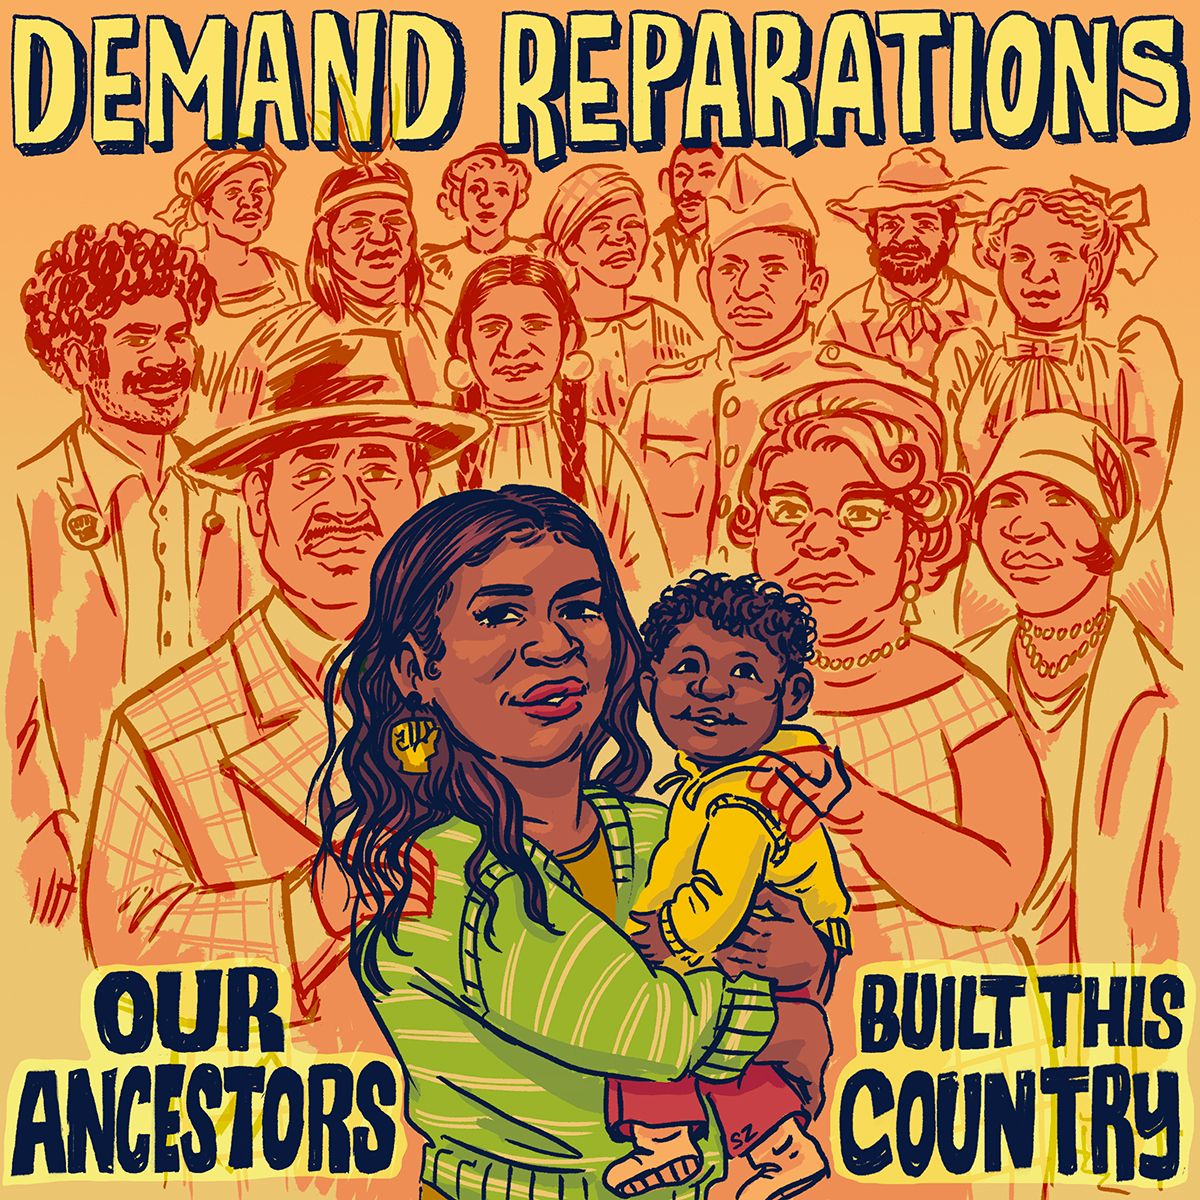 Collage by Sophia Zarders that features "demand reparations" and "our ancestors built this country" with drawings of a black mother and child with ancestors standing behind them.